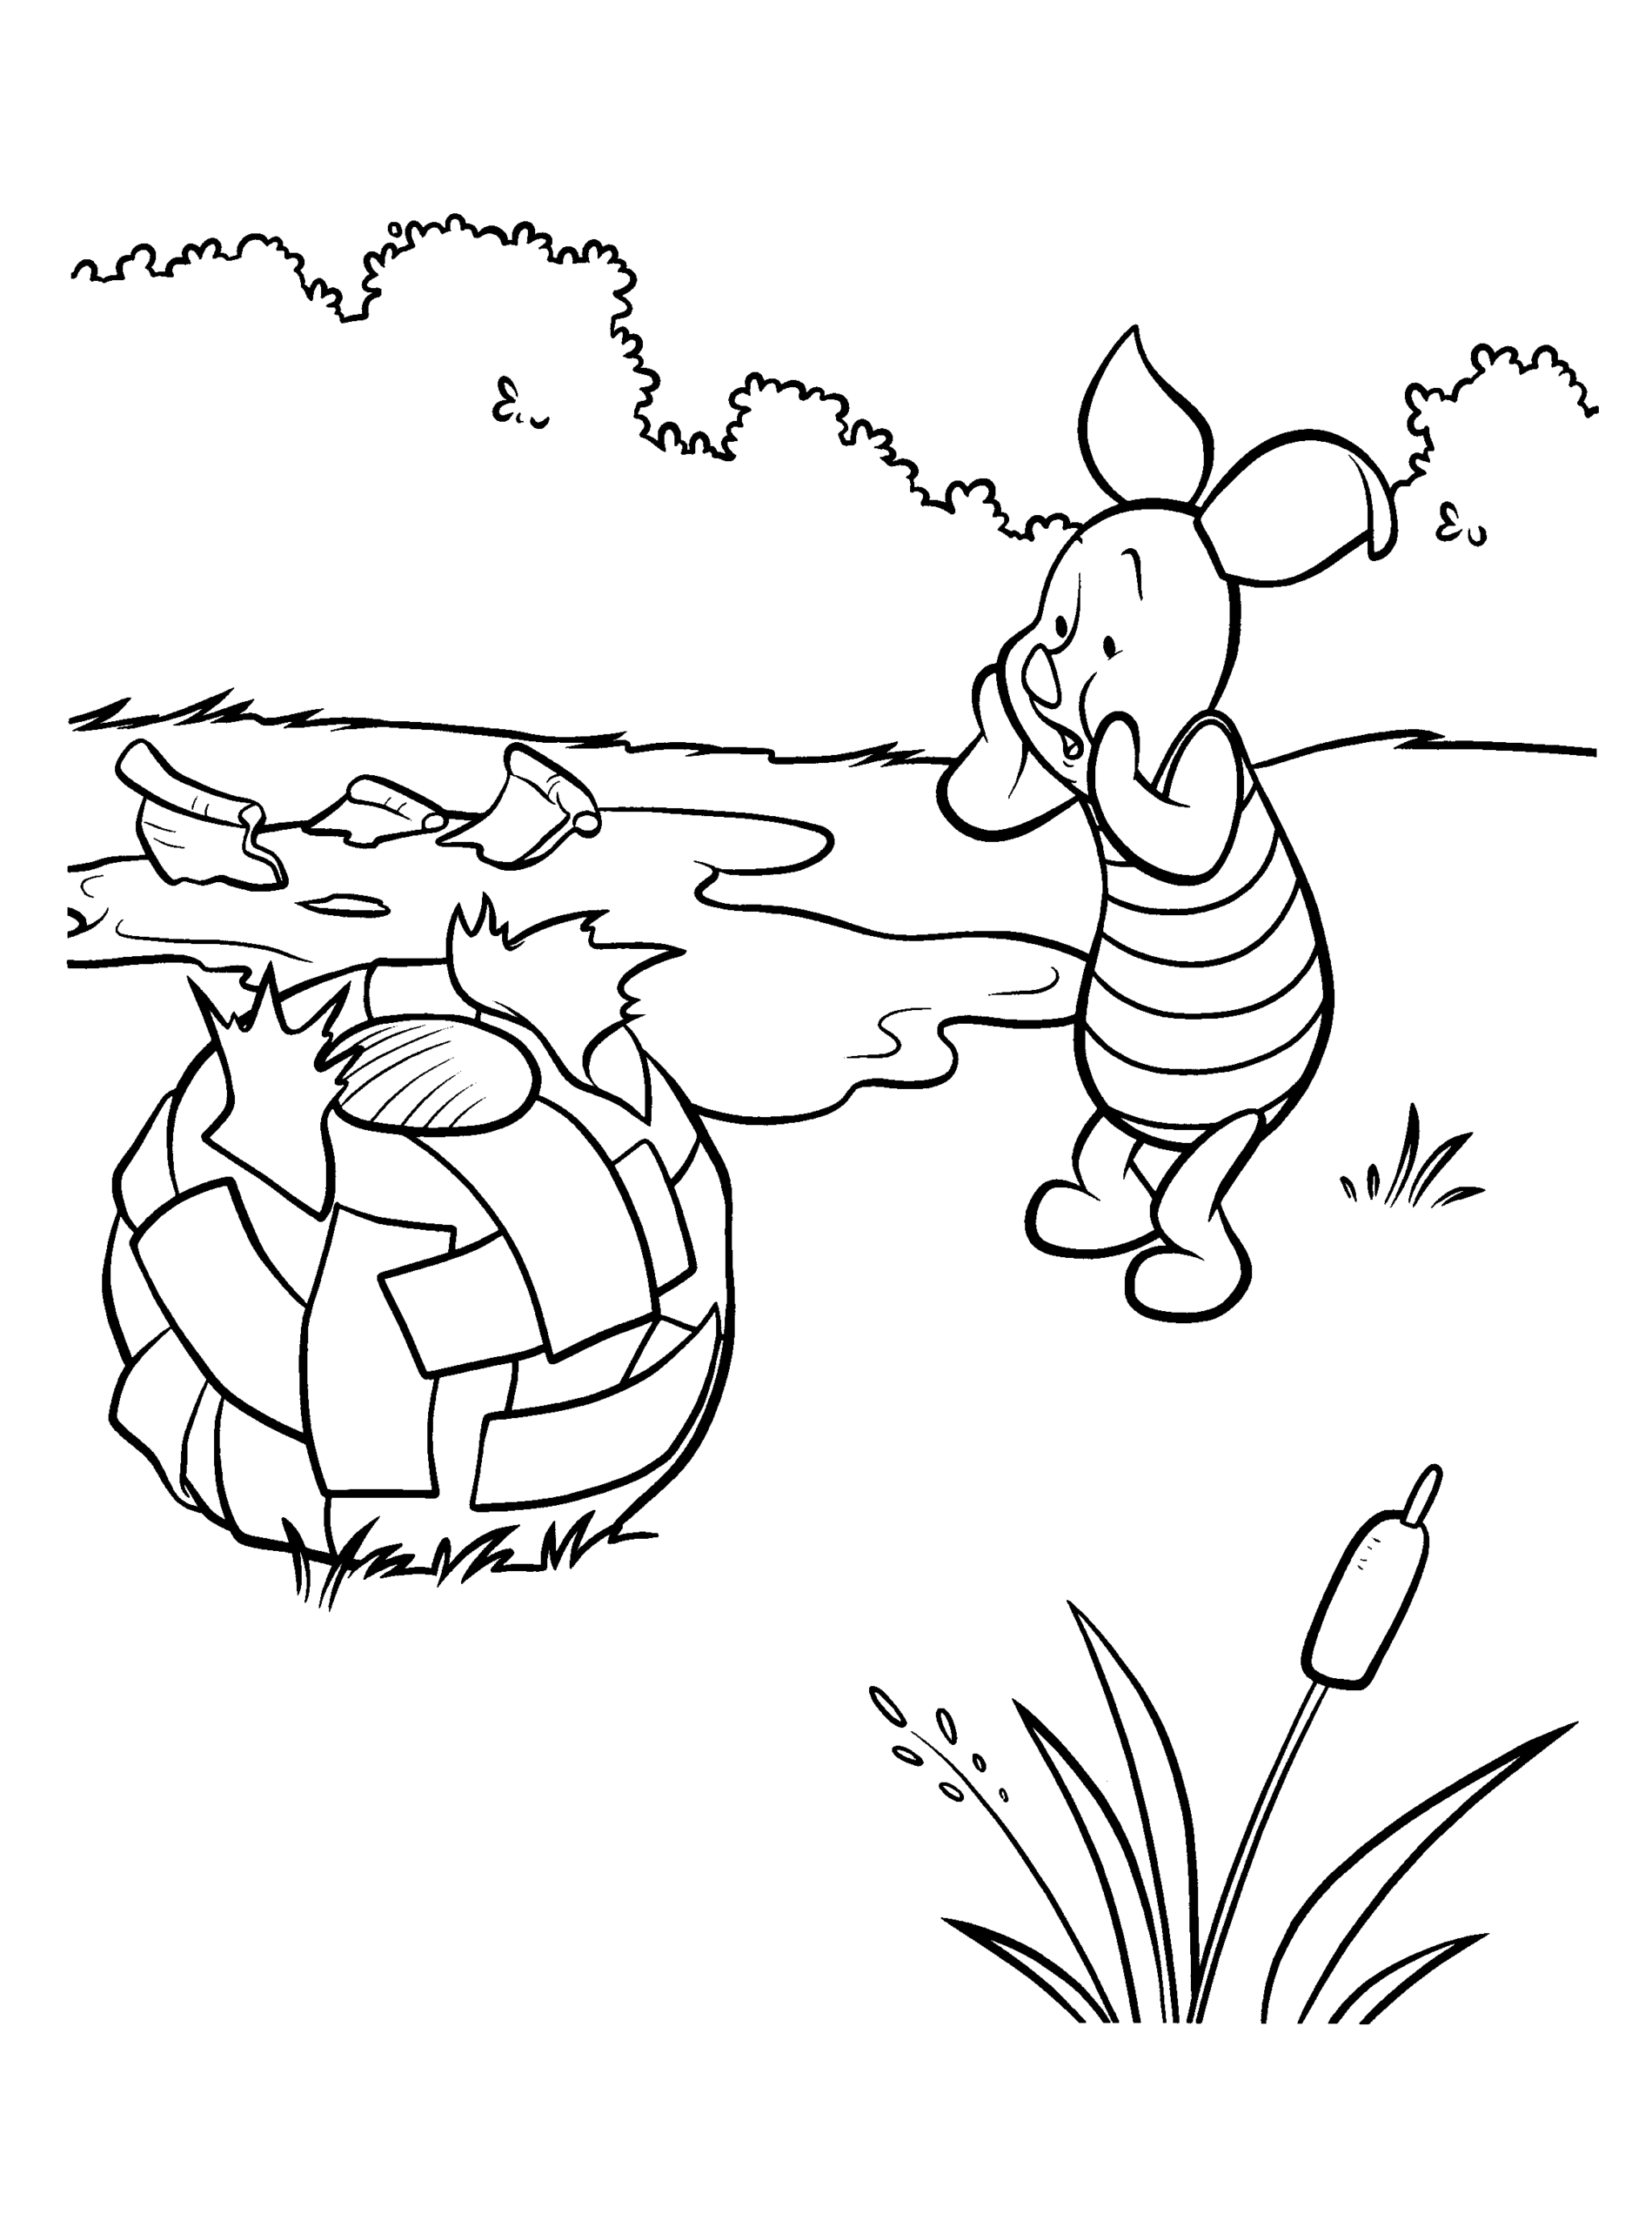 Winnie the Pooh Coloring Pages Cartoons winnie the pooh 24 Printable 2020 7125 Coloring4free